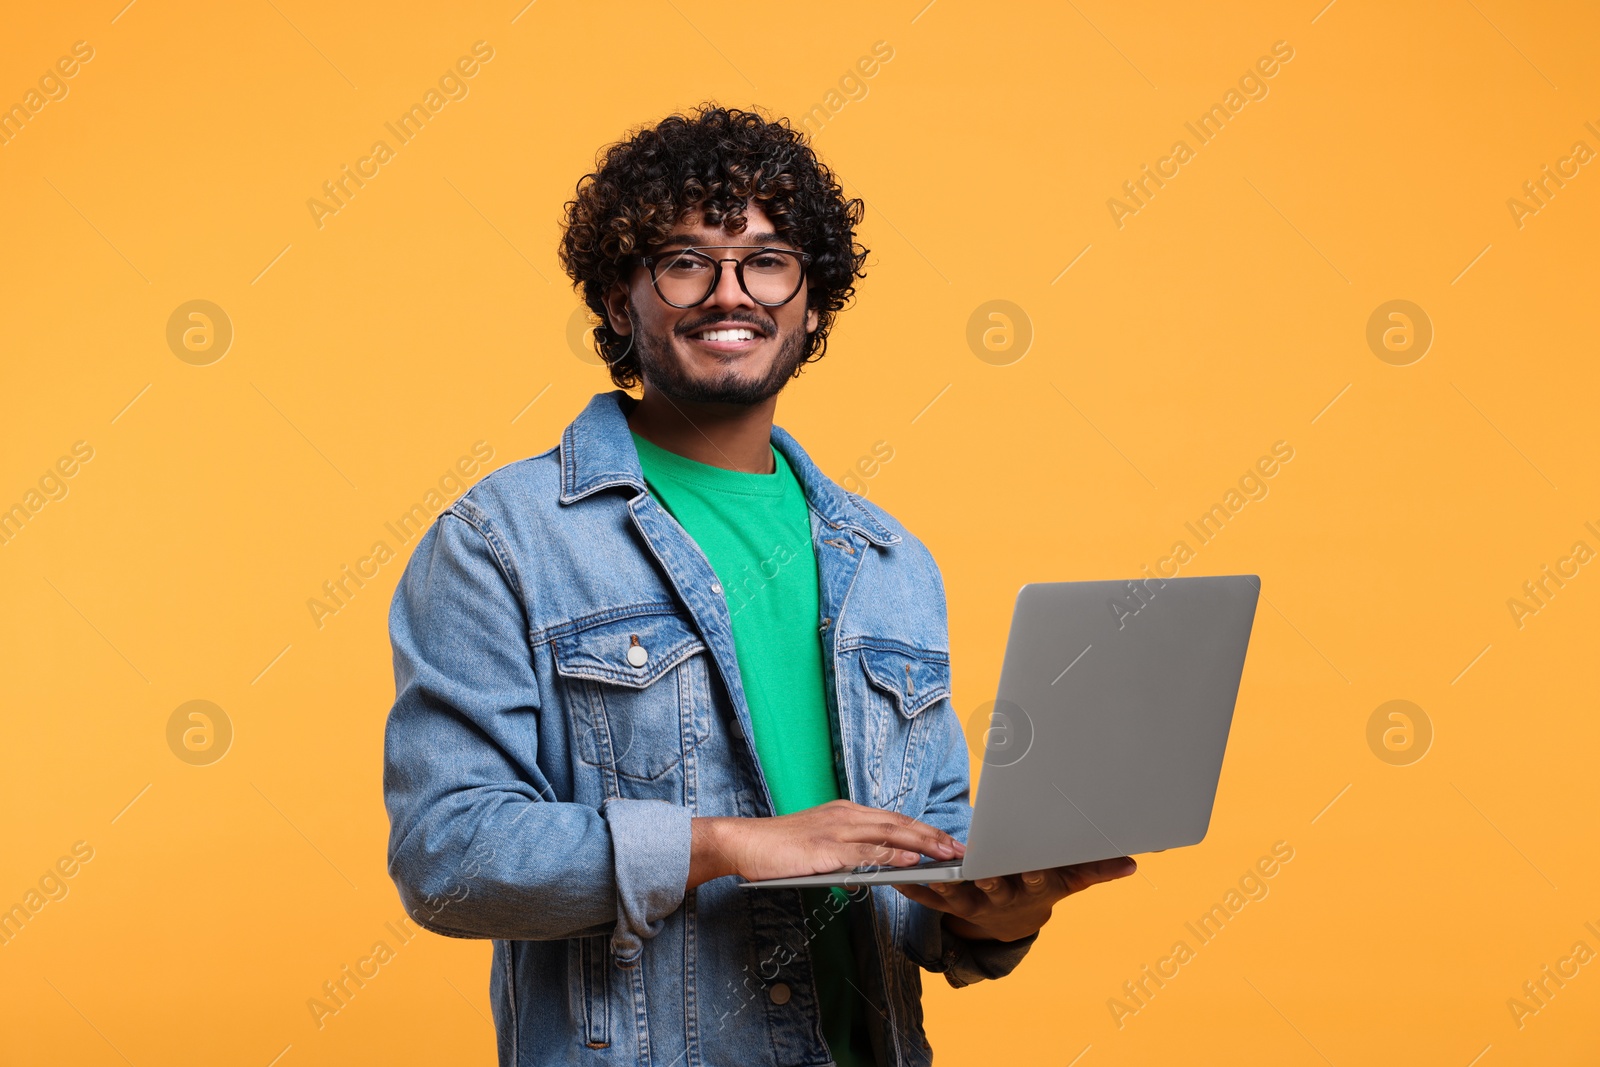 Photo of Smiling man with laptop on yellow background